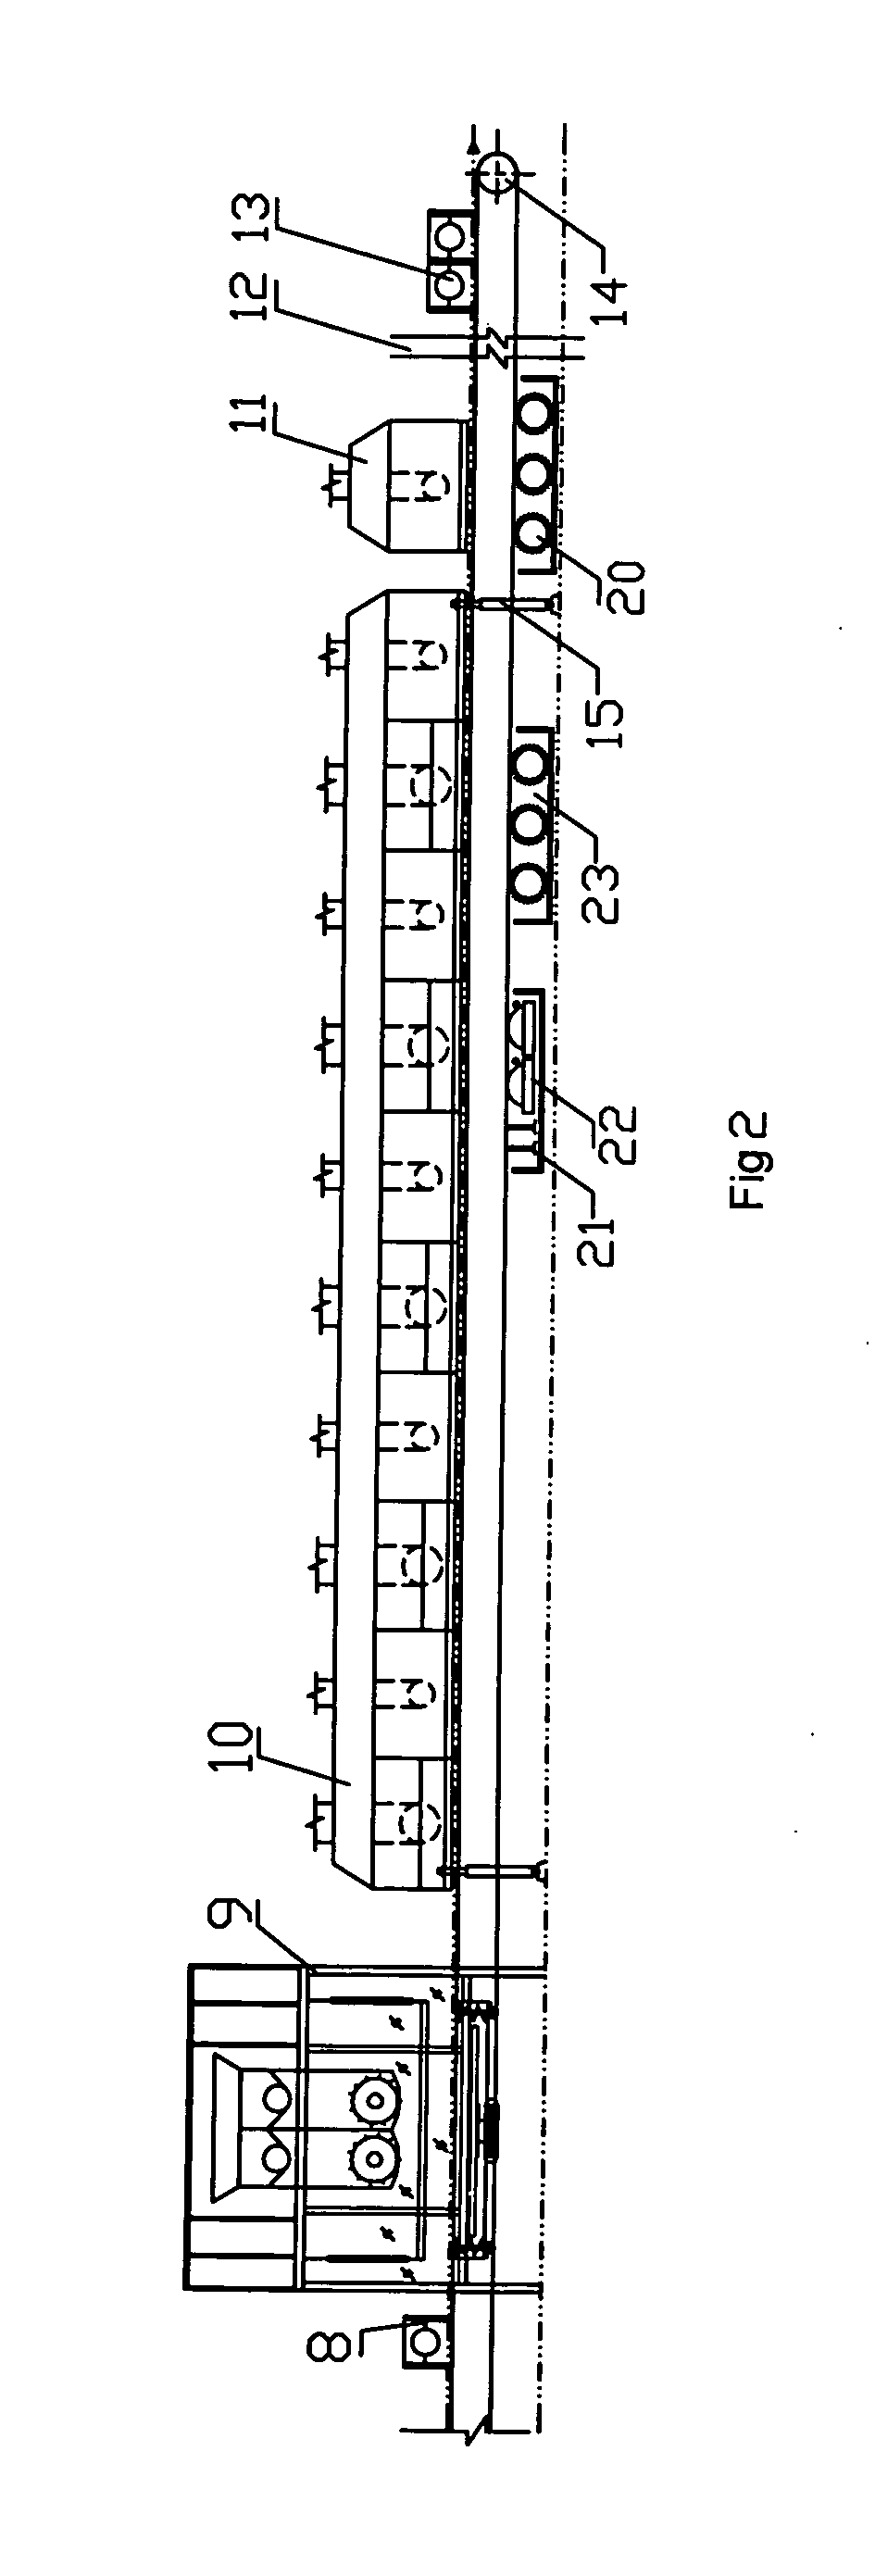 Manufacturing method for multistage adhesive applying and multicolor flocking, and apparatus specifically designed therefor